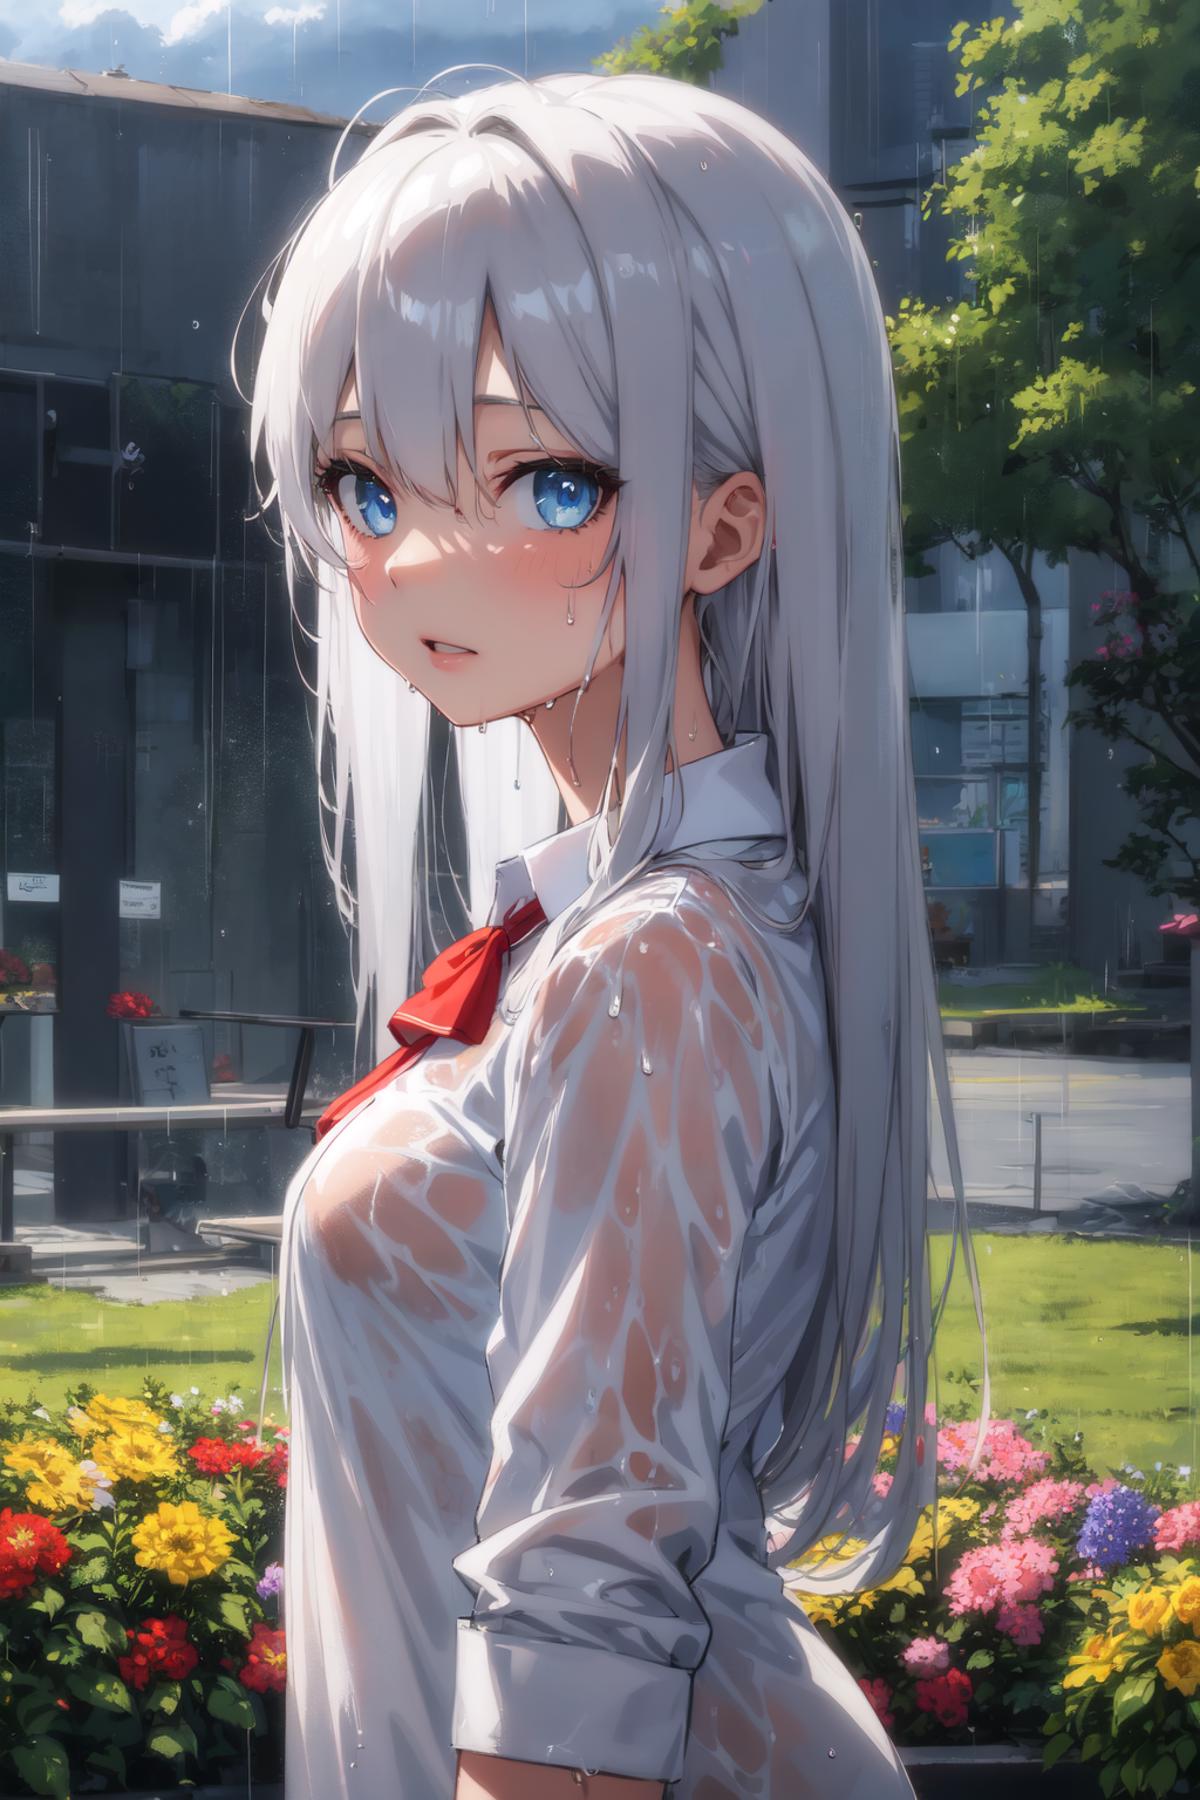 A girl with white hair and a red bow in her hair. She is wearing a white shirt and is standing outside with her hair wet.